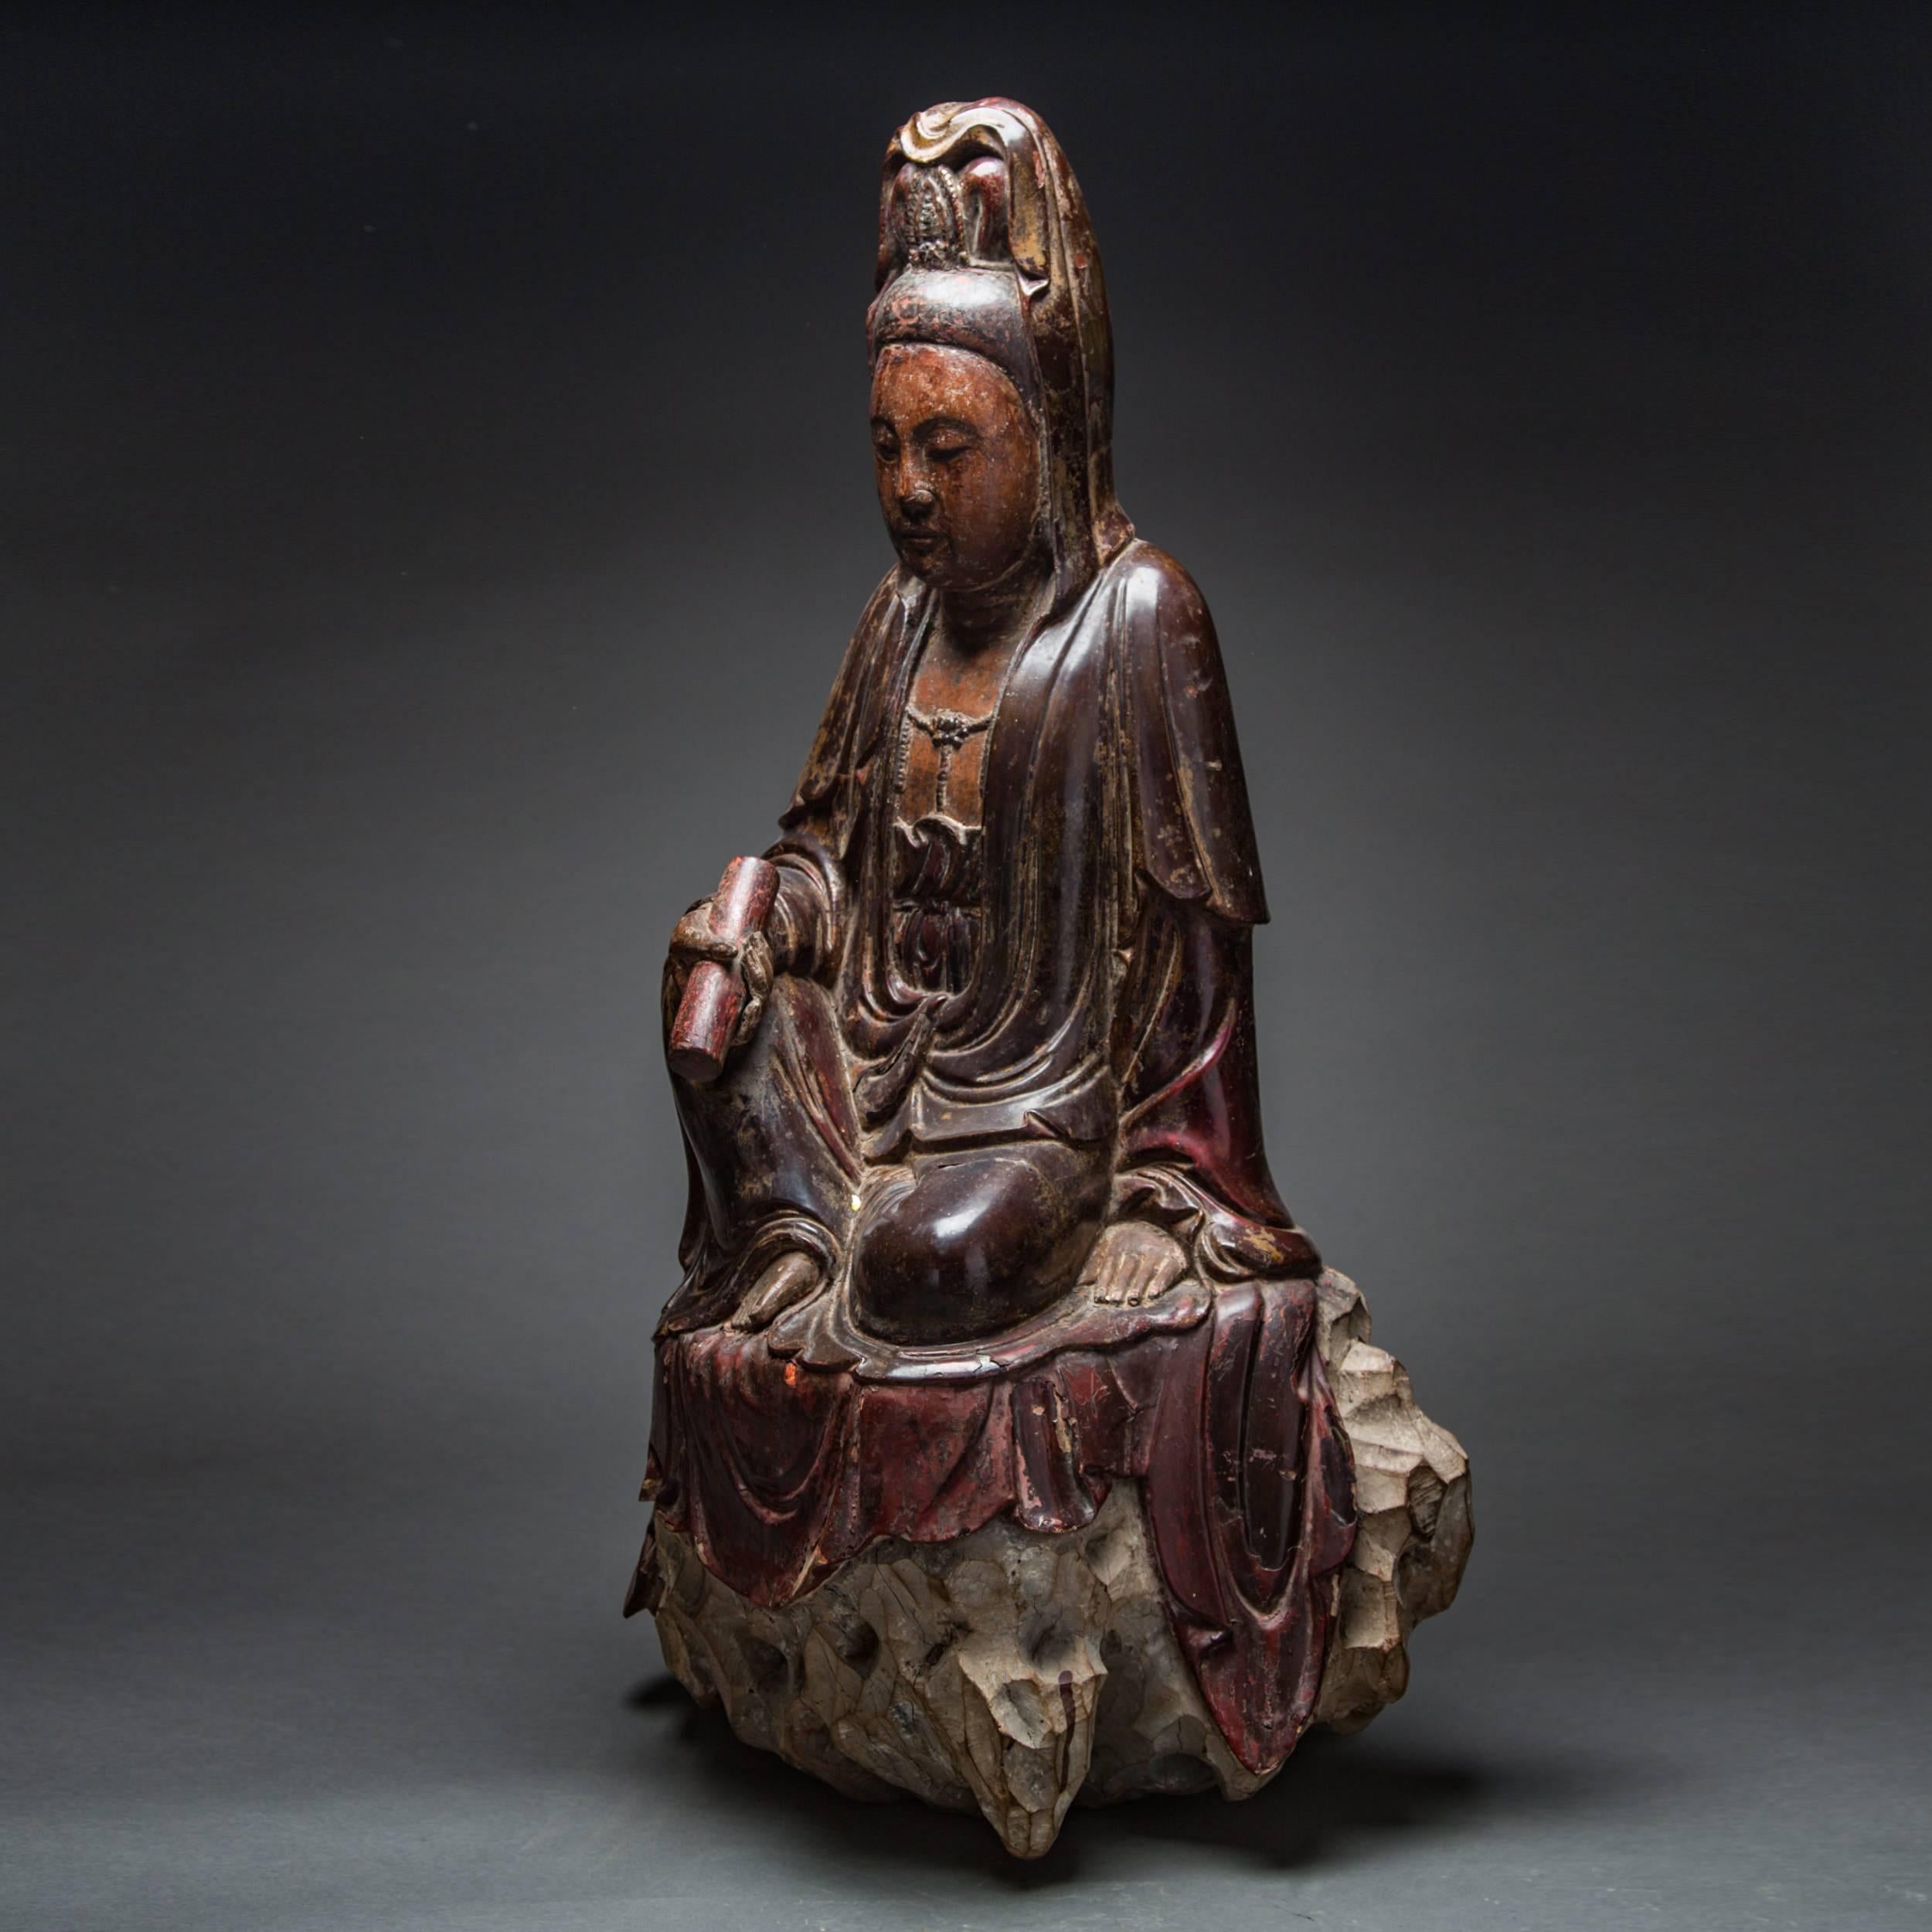 Bodhisattvas are enlightened beings who have put off entering paradise in order to help others attain enlightenment. There are many different Bodhisattvas, but the most famous in China is Avalokitesvara, known in Chinese as Guanyin. Early depictions